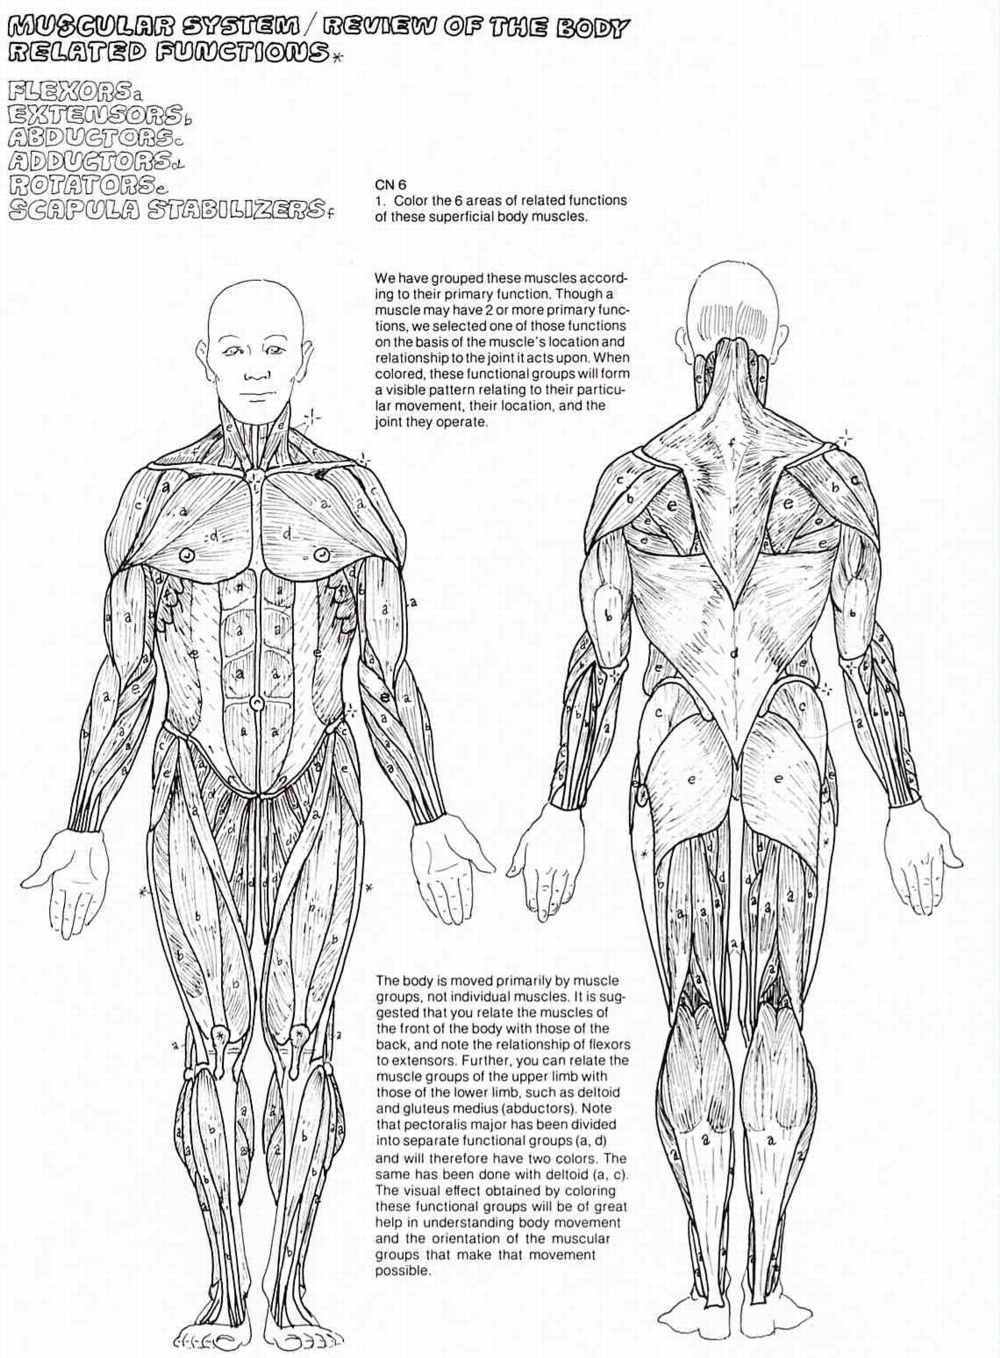 The Muscular System Coloring Pages Coloring Home